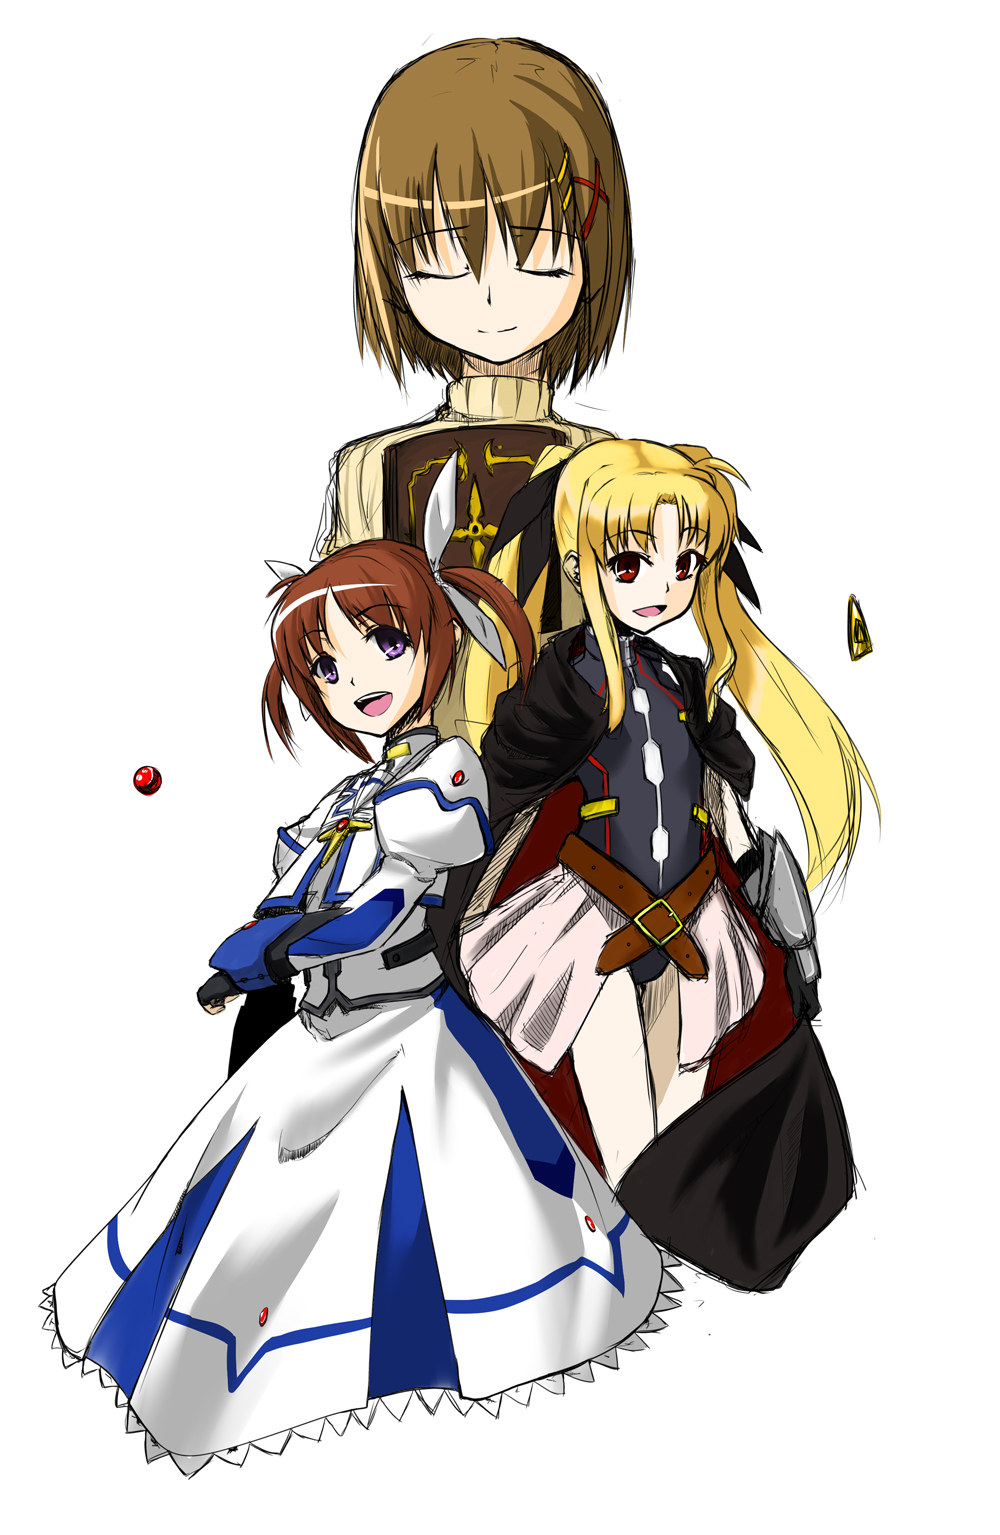 armor bardiche belt blonde_hair book brown_hair buckle cape closed_eyes dress fate_testarossa fingerless_gloves gloves hair_ribbon highres long_hair lyrical_nanoha mahou_shoujo_lyrical_nanoha mahou_shoujo_lyrical_nanoha_a's mahou_shoujo_lyrical_nanoha_the_movie_2nd_a's multiple_girls nanotsuki open_mouth puffy_sleeves purple_eyes raising_heart red_eyes ribbon short_hair short_twintails sketch skirt smile sweater takamachi_nanoha tome_of_the_night_sky twintails white_background yagami_hayate